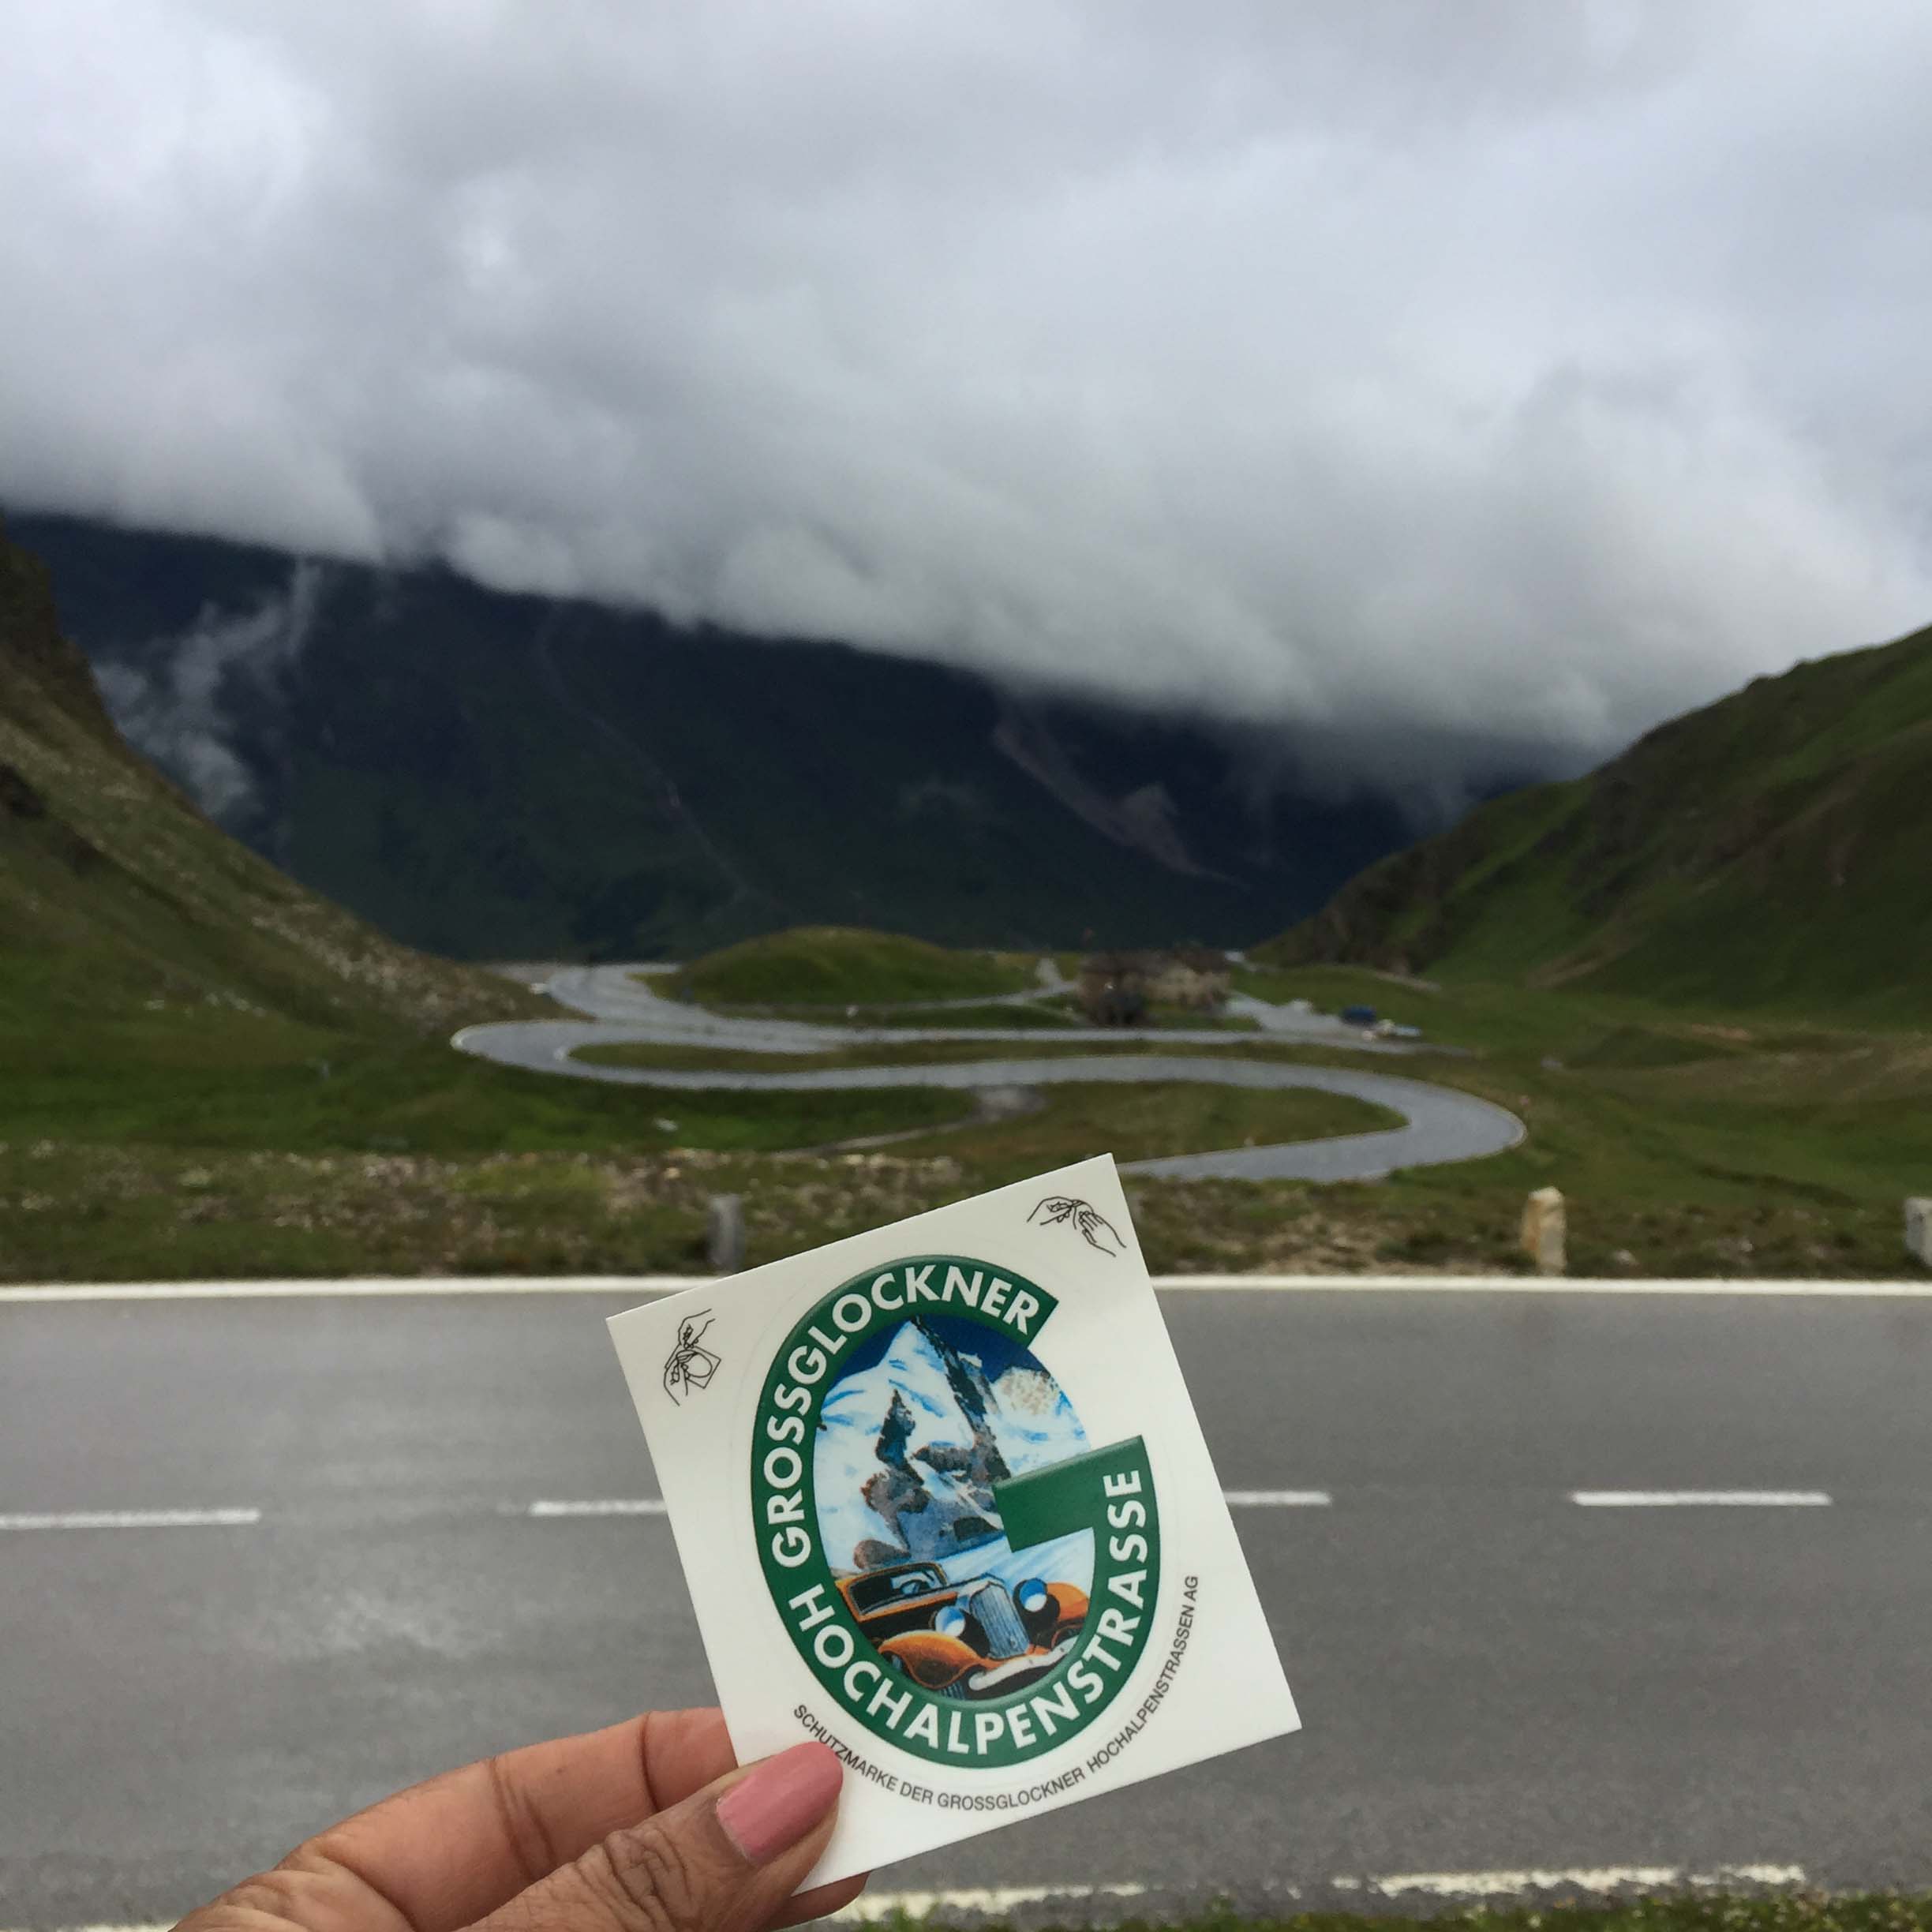 Grossglockner Hochalpenstrasse – is the High Alpine Road in Austria that passes through the Hohe Tauern National Park. See more on the post #Austria #roadtrip #GrossglocknerHochalpenstrasse